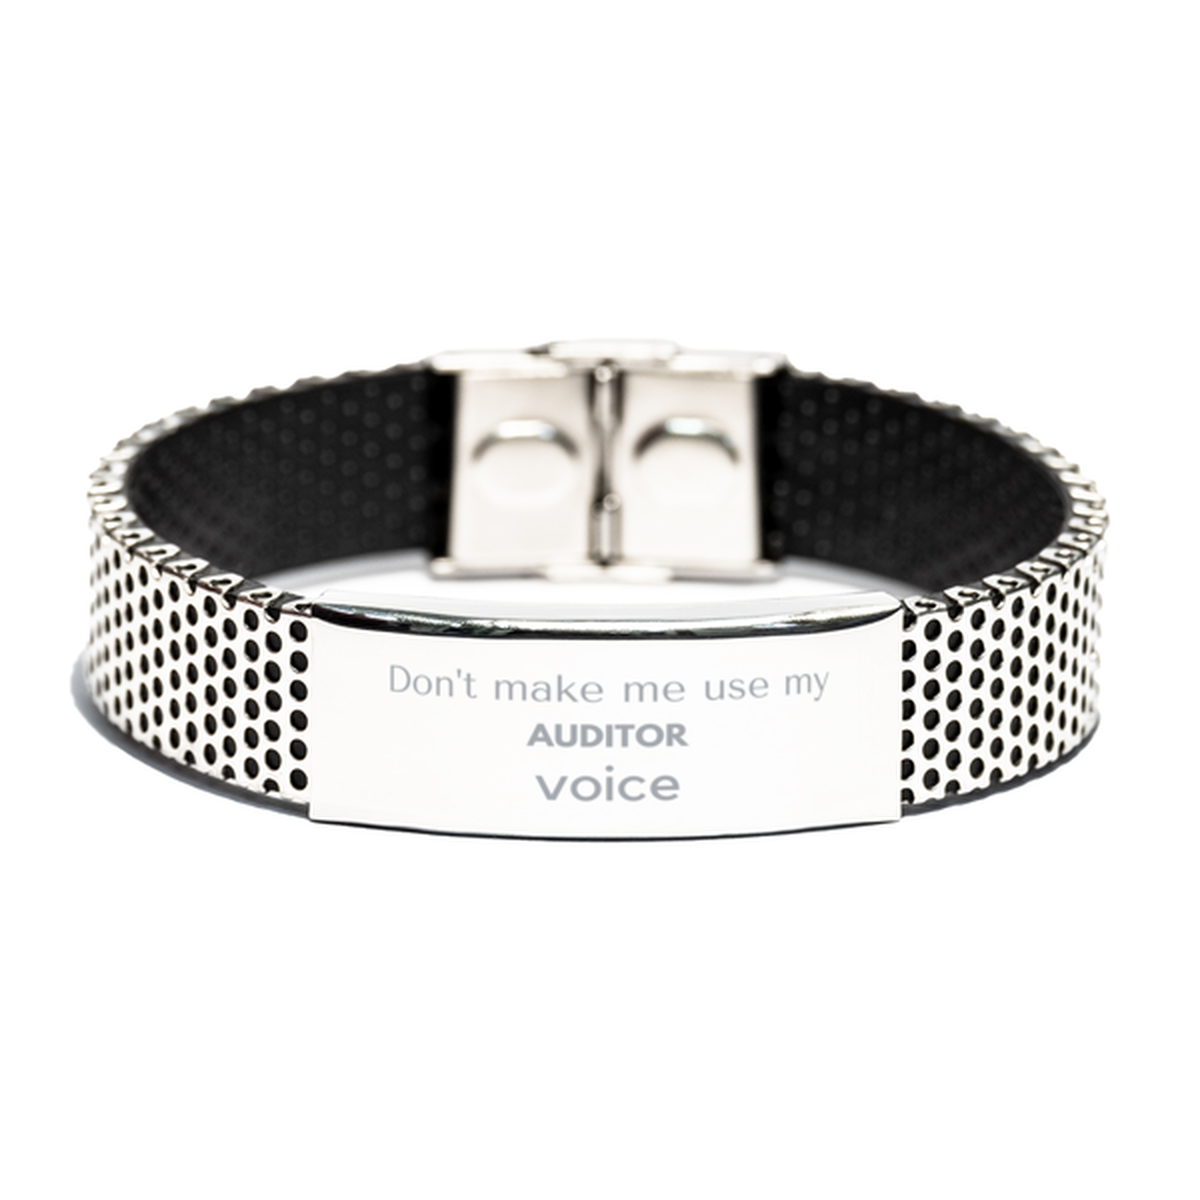 Don't make me use my Auditor voice, Sarcasm Auditor Gifts, Christmas Auditor Stainless Steel Bracelet Birthday Unique Gifts For Auditor Coworkers, Men, Women, Colleague, Friends